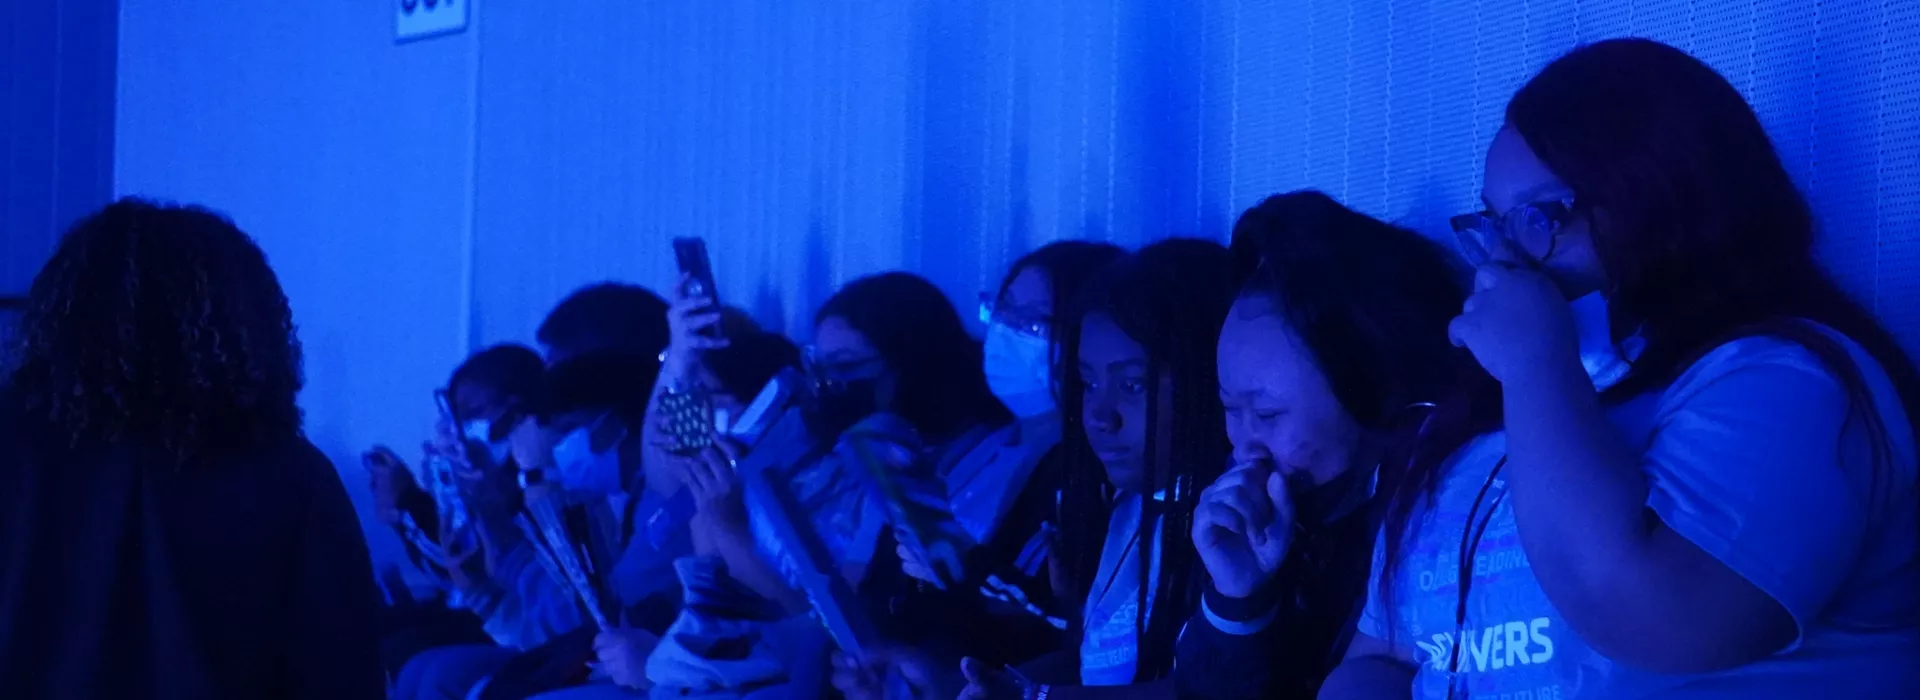 students laughing with blue light